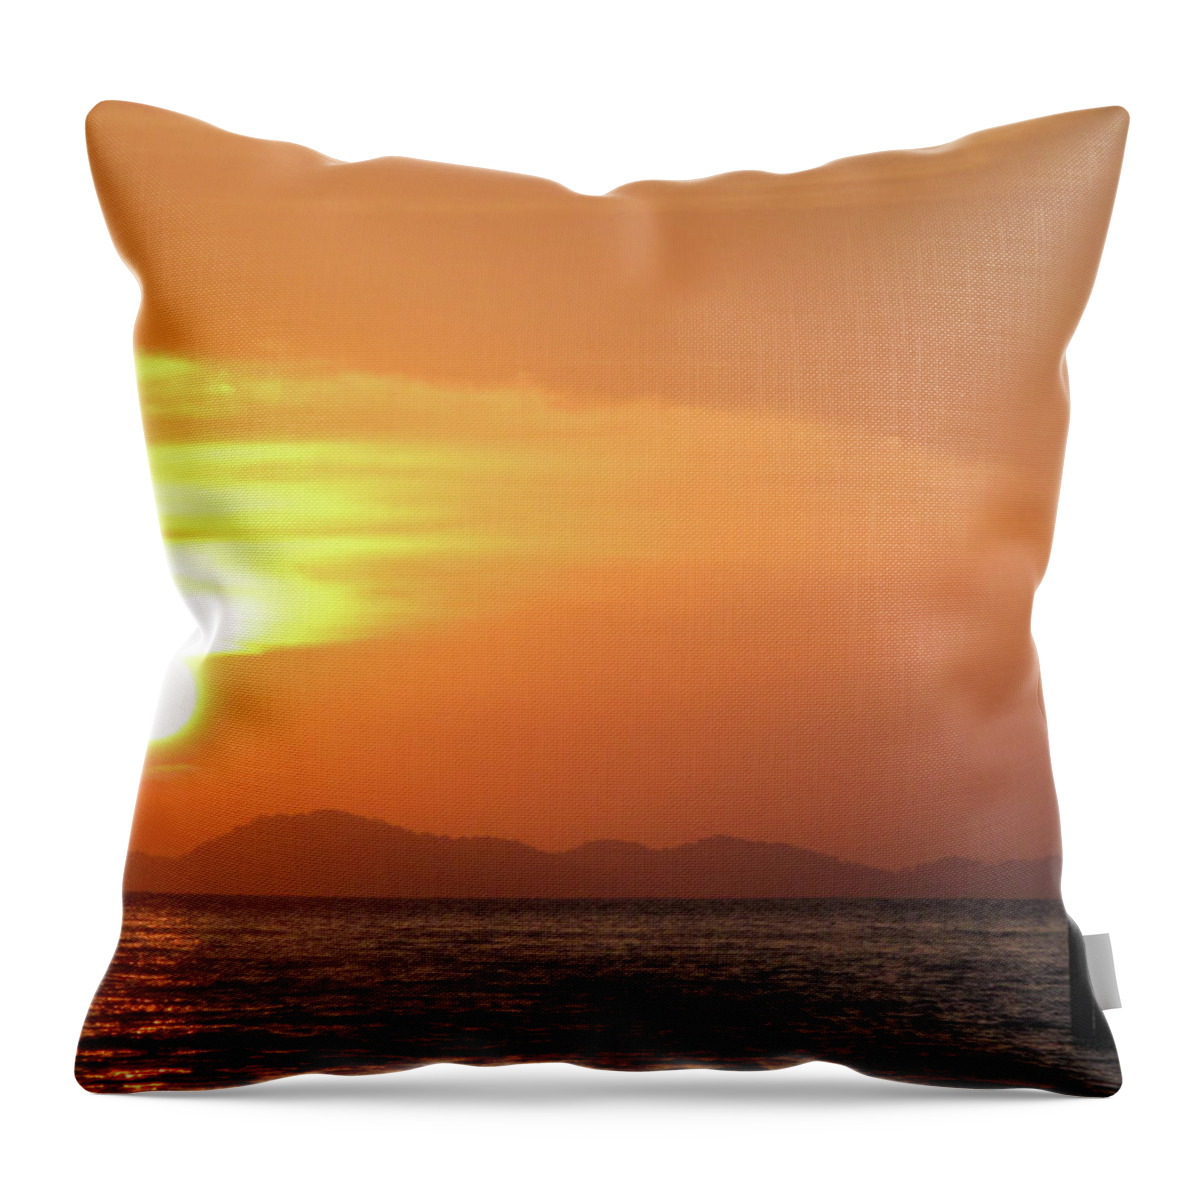 Scenics Throw Pillow featuring the photograph Watching A Sunset From The Jetty by Thepurpledoor